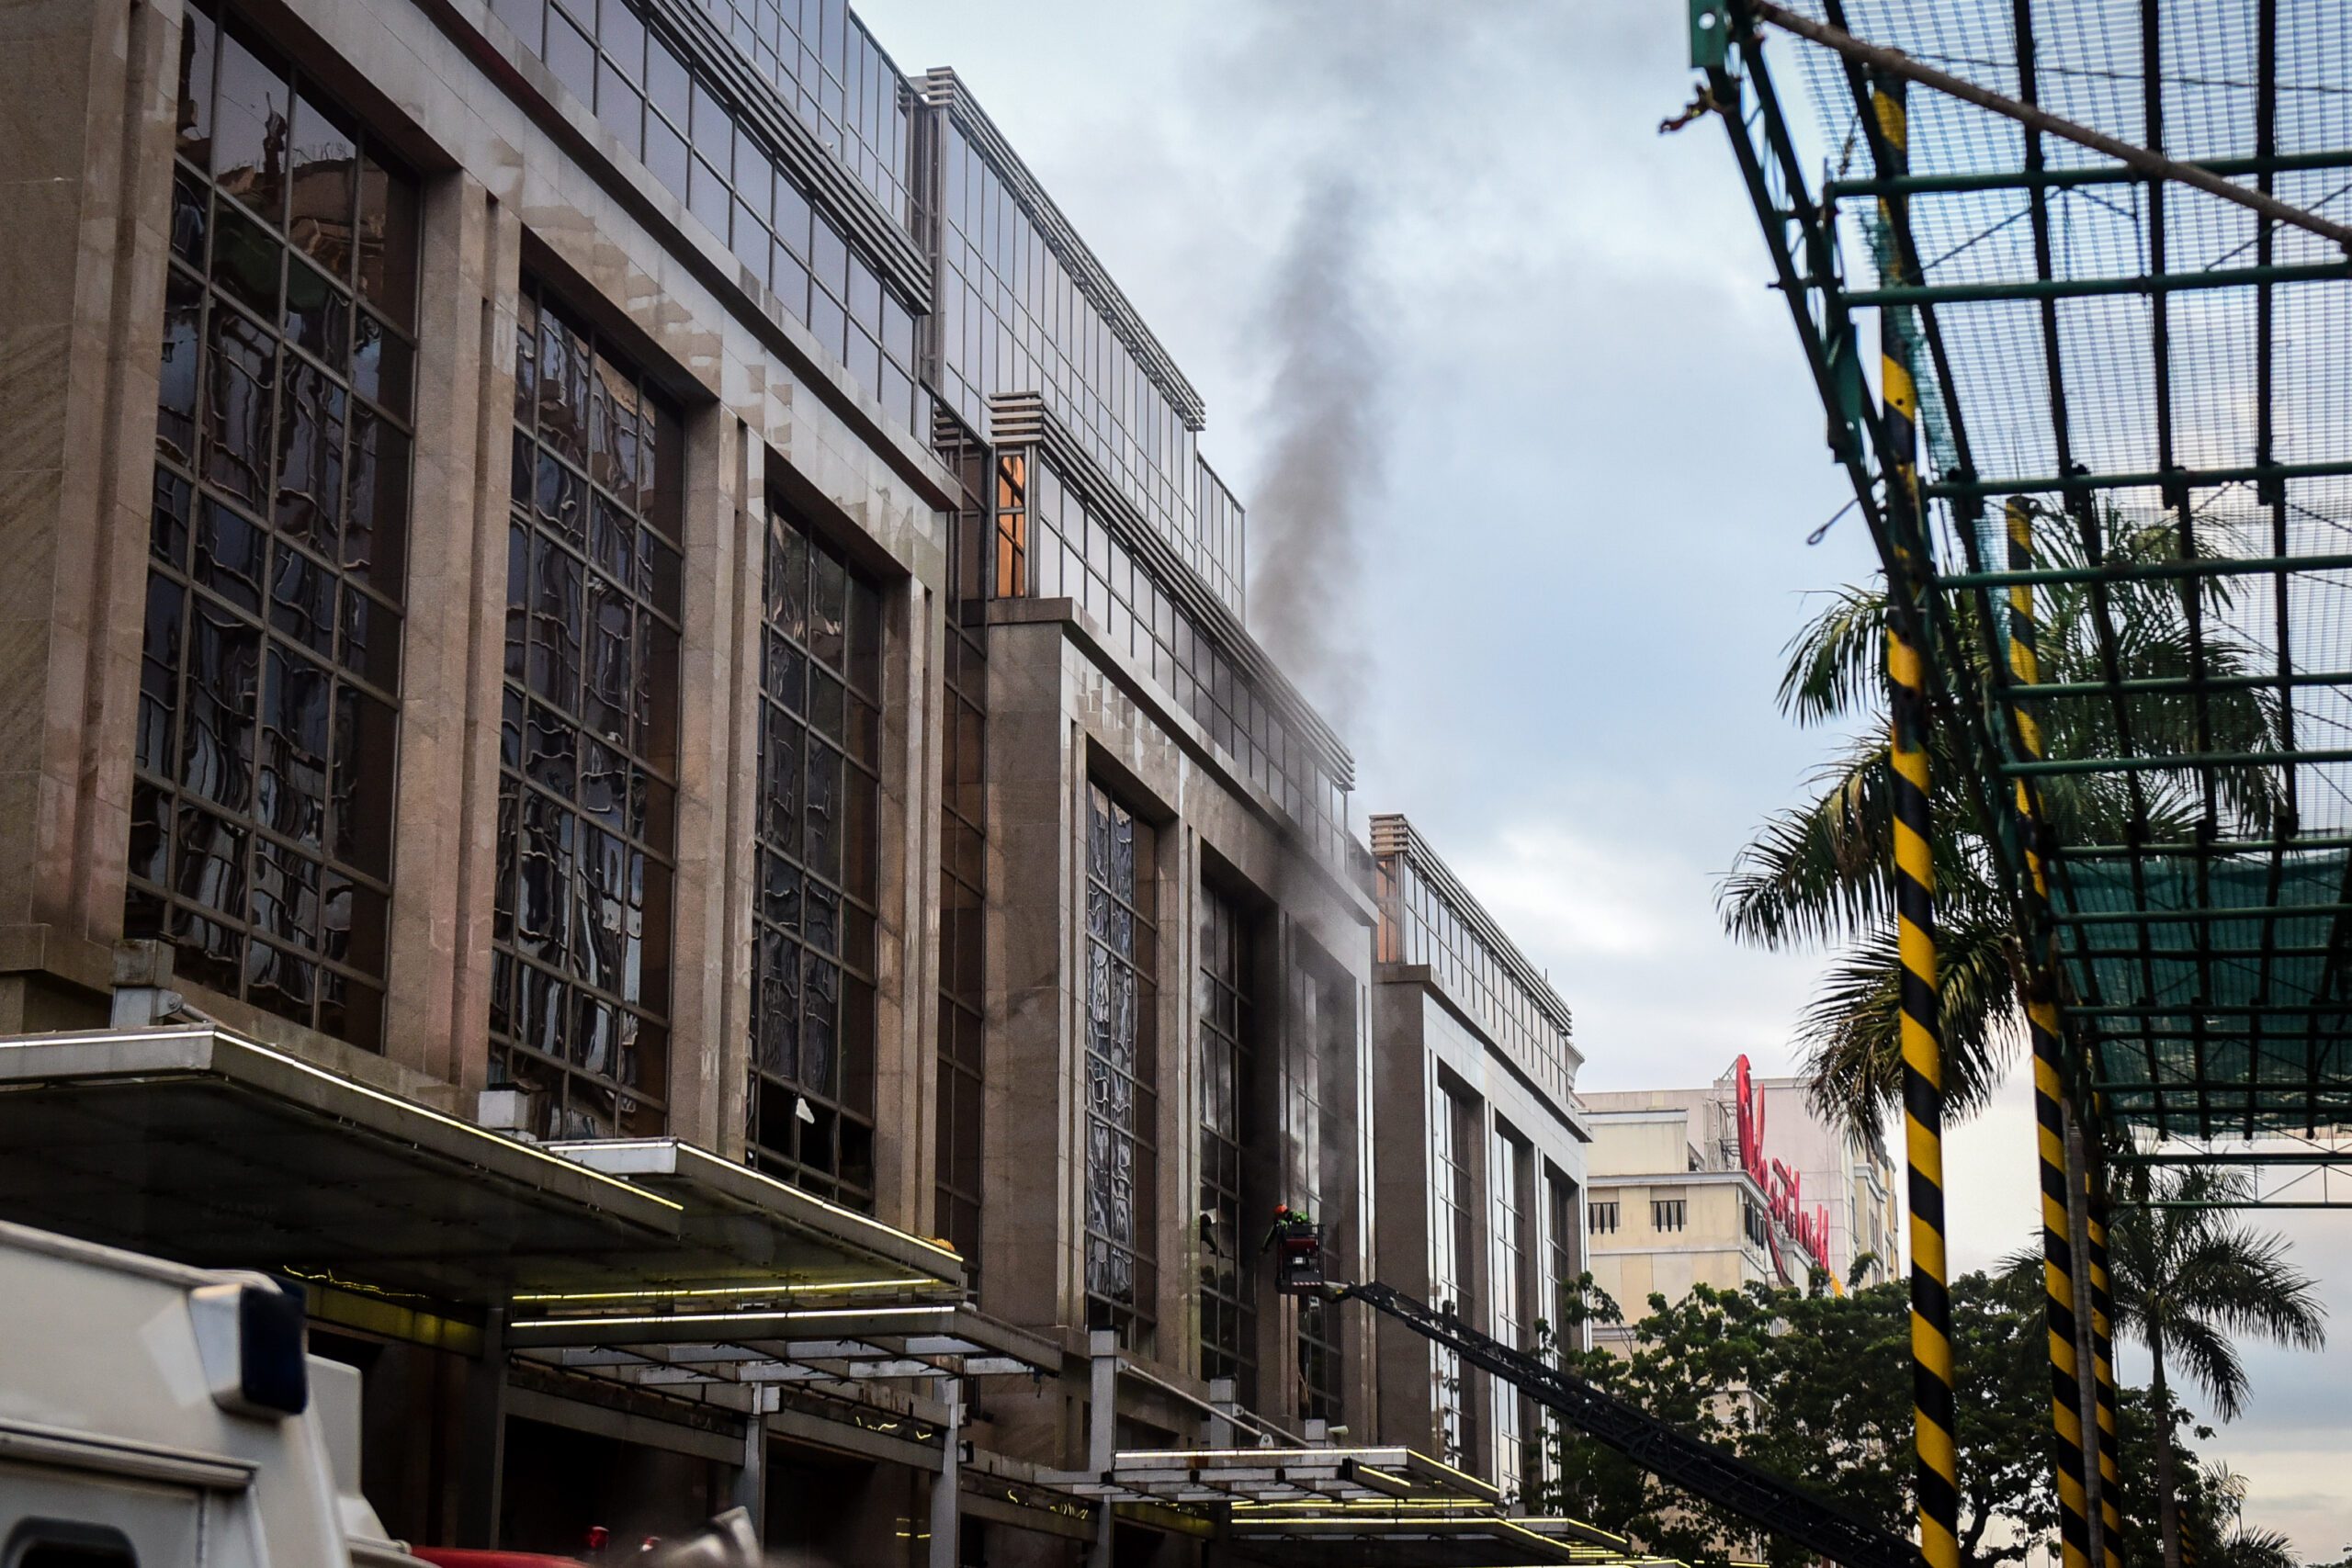 Resorts World fire victims ‘2 meters away’ from exit – Fariñas